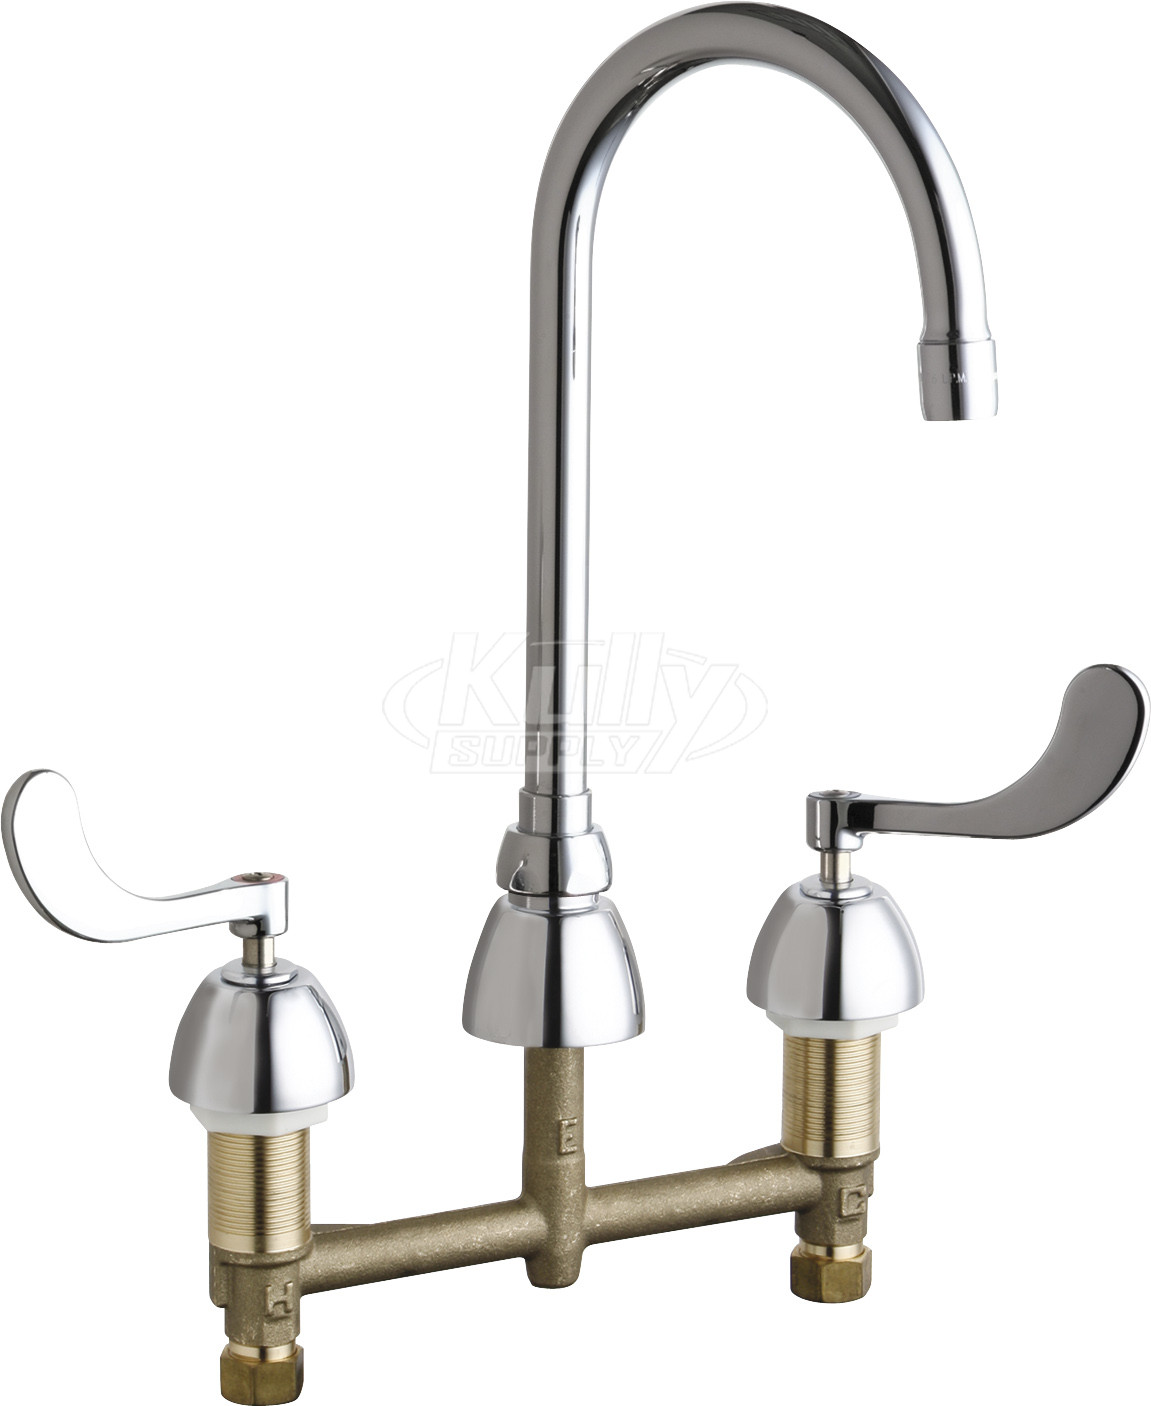 Chicago 786-E35ABCP Concealed Hot and Cold Water Sink Faucet